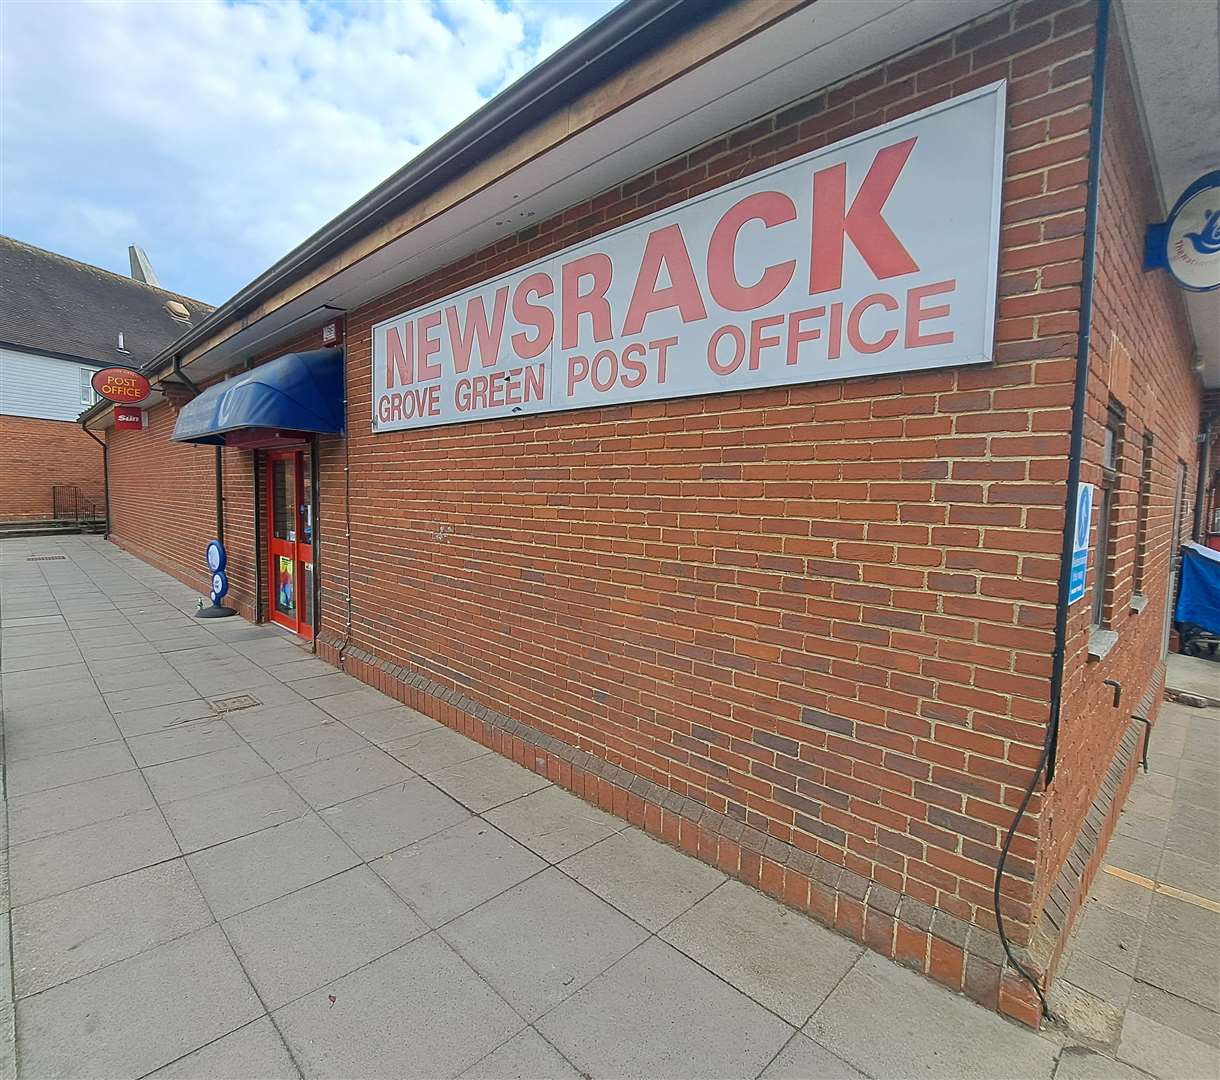 The Newsrack store and post office at Grove Green